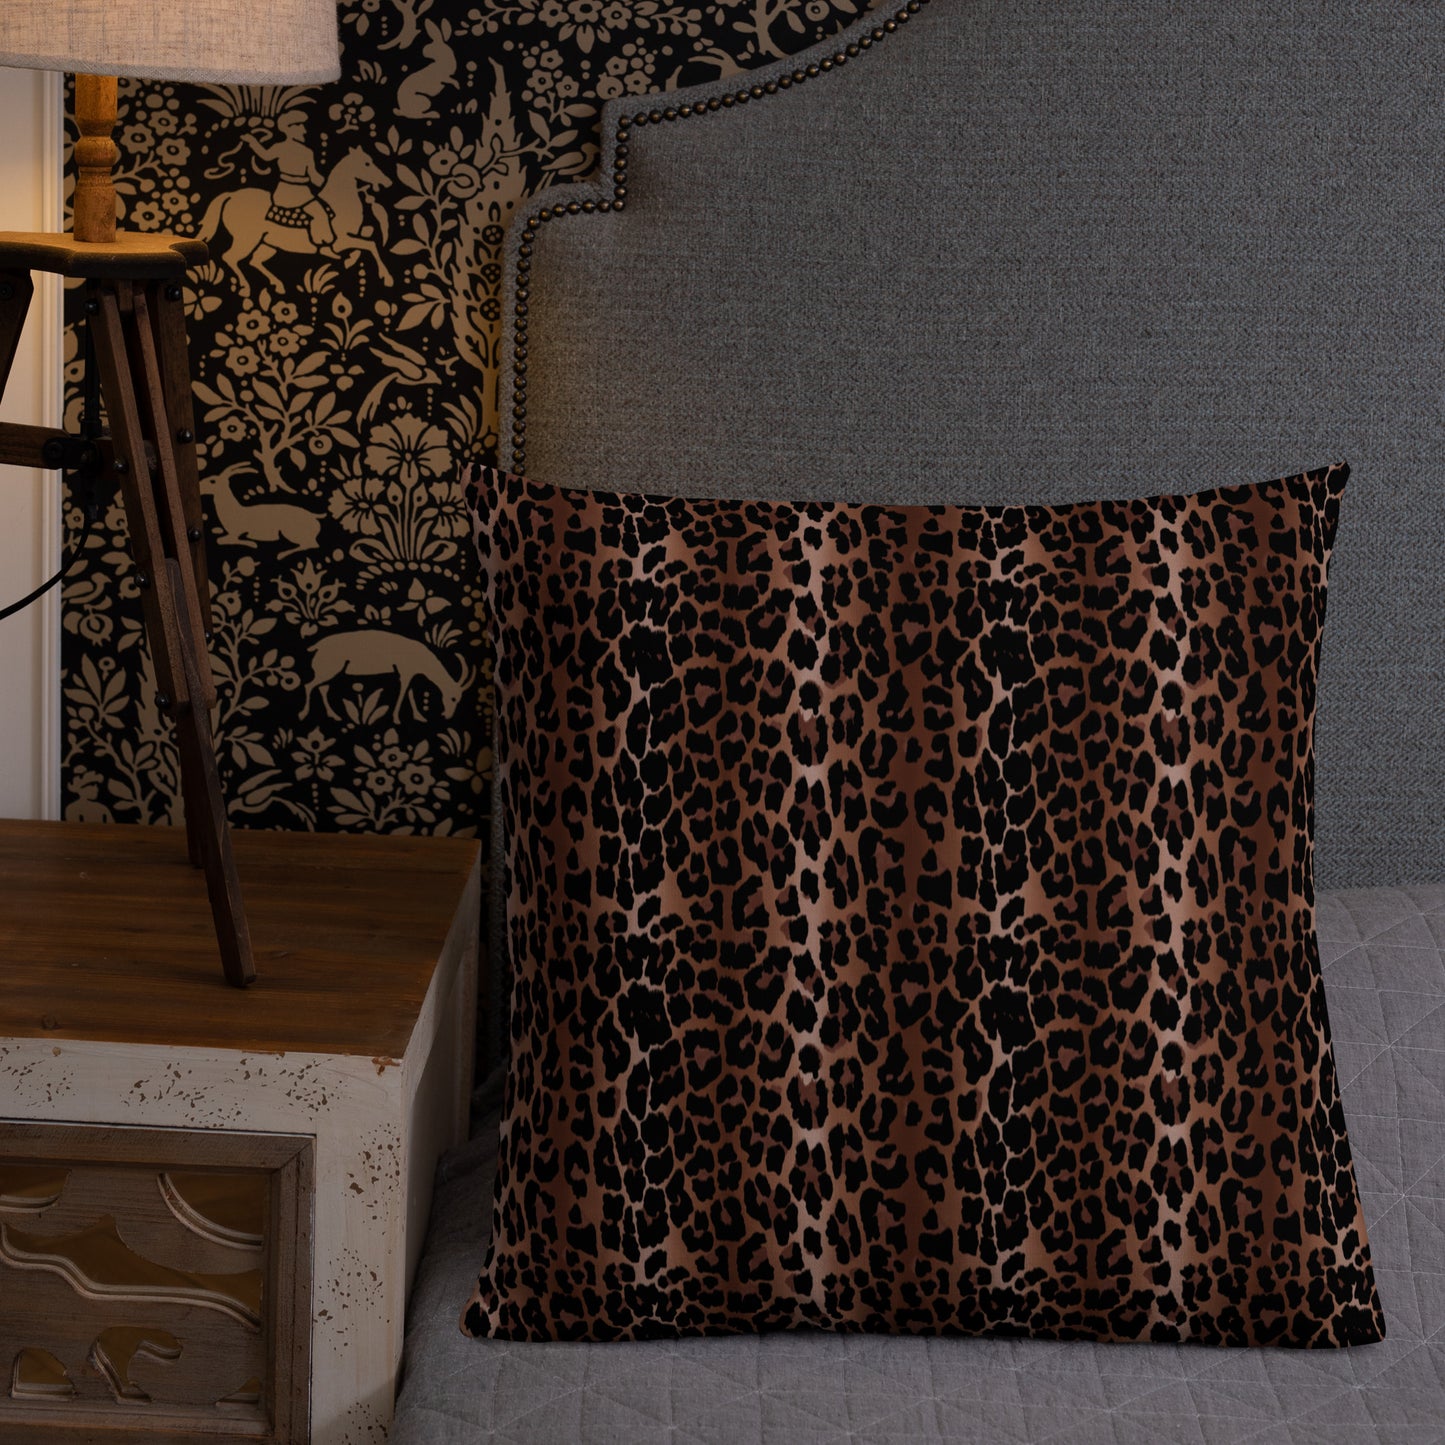 OG Leopard Print Premium Decorative Throw Pillow | 3 Sizes | Pinup Couture Home